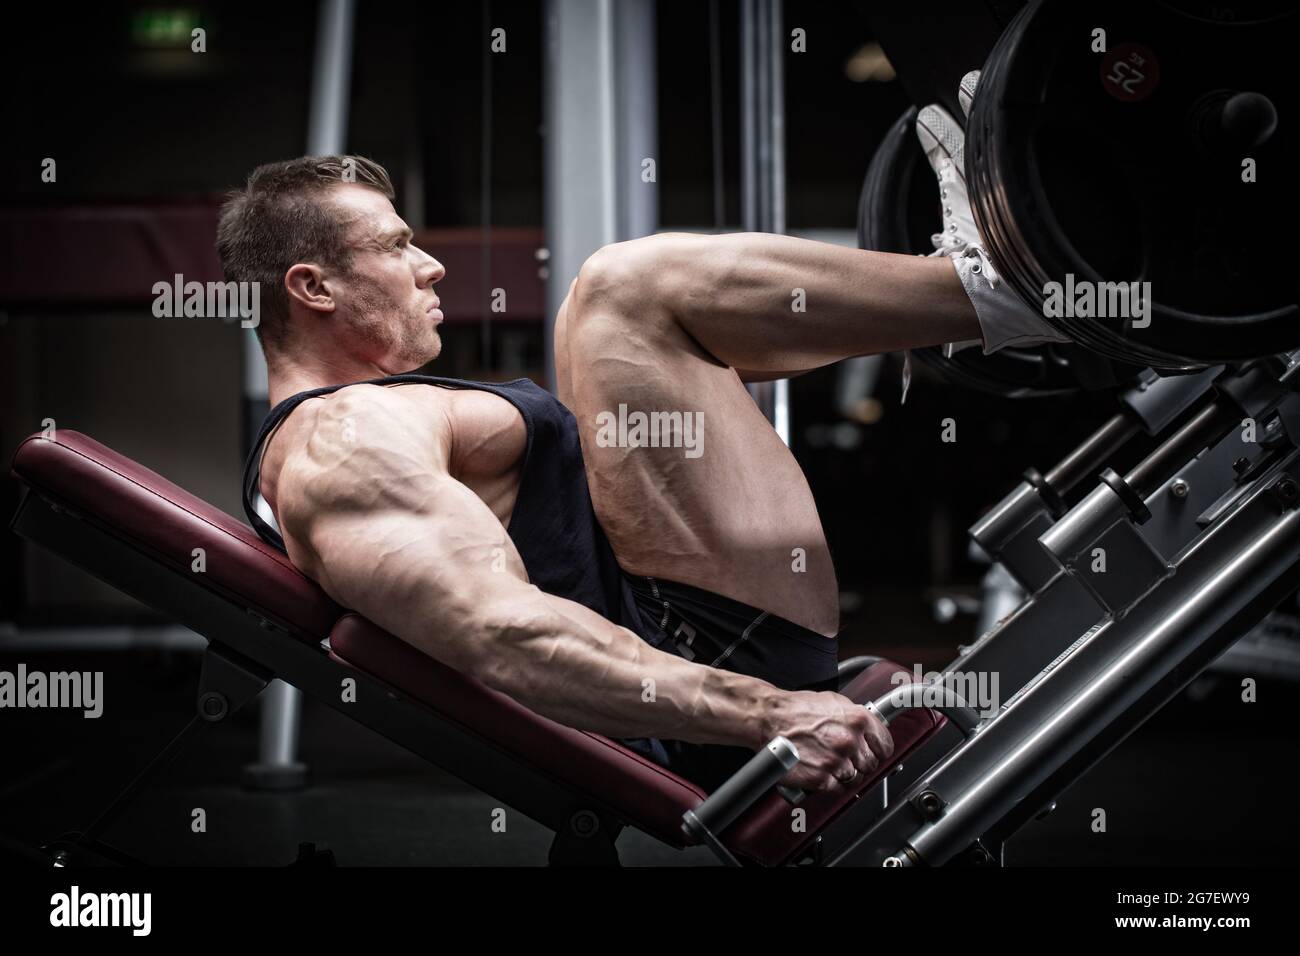 Man in gym training at leg press to define his upper leg muscles Stock Photo